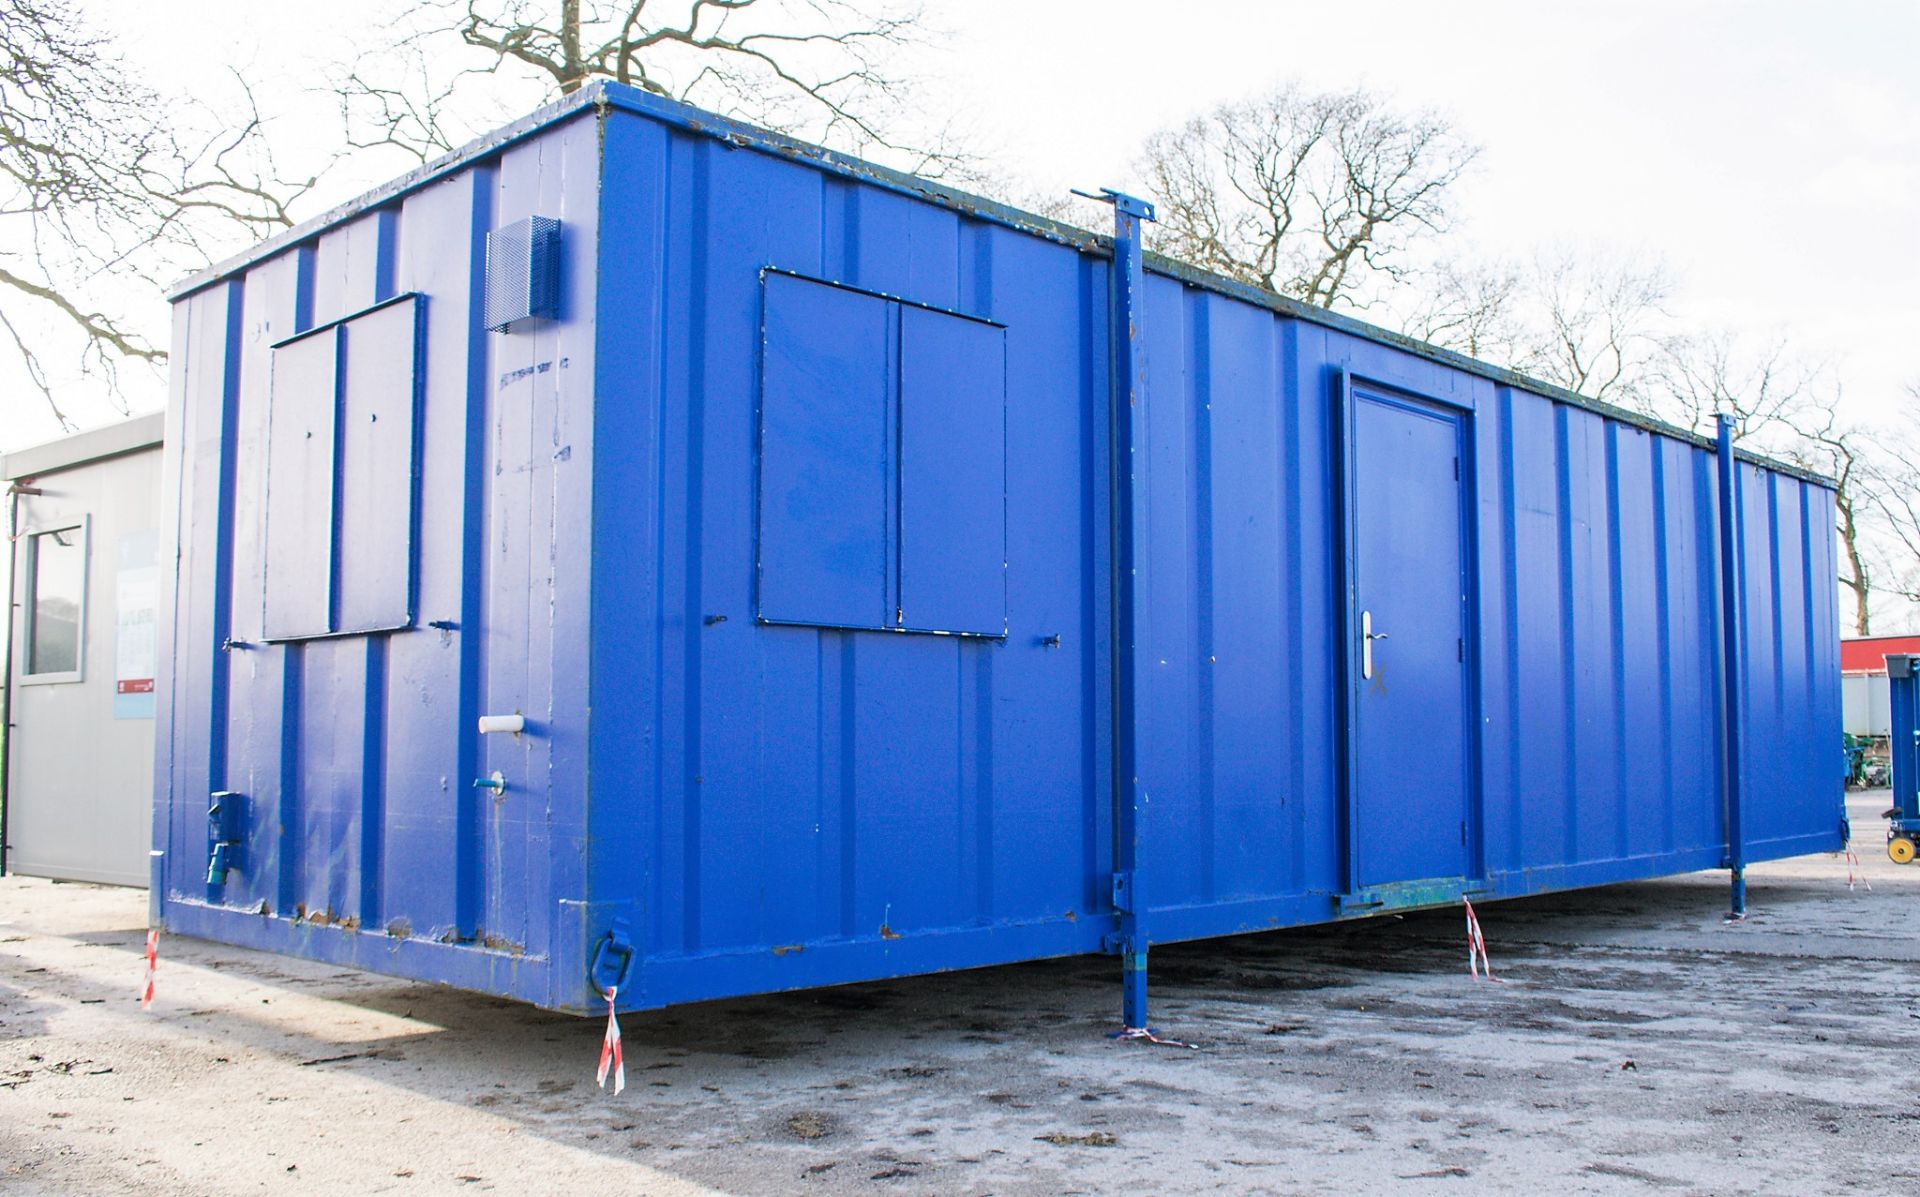 32 ft x 10 ft steel anti vandal office site unit Comprising of: office room & kitchen area c/w